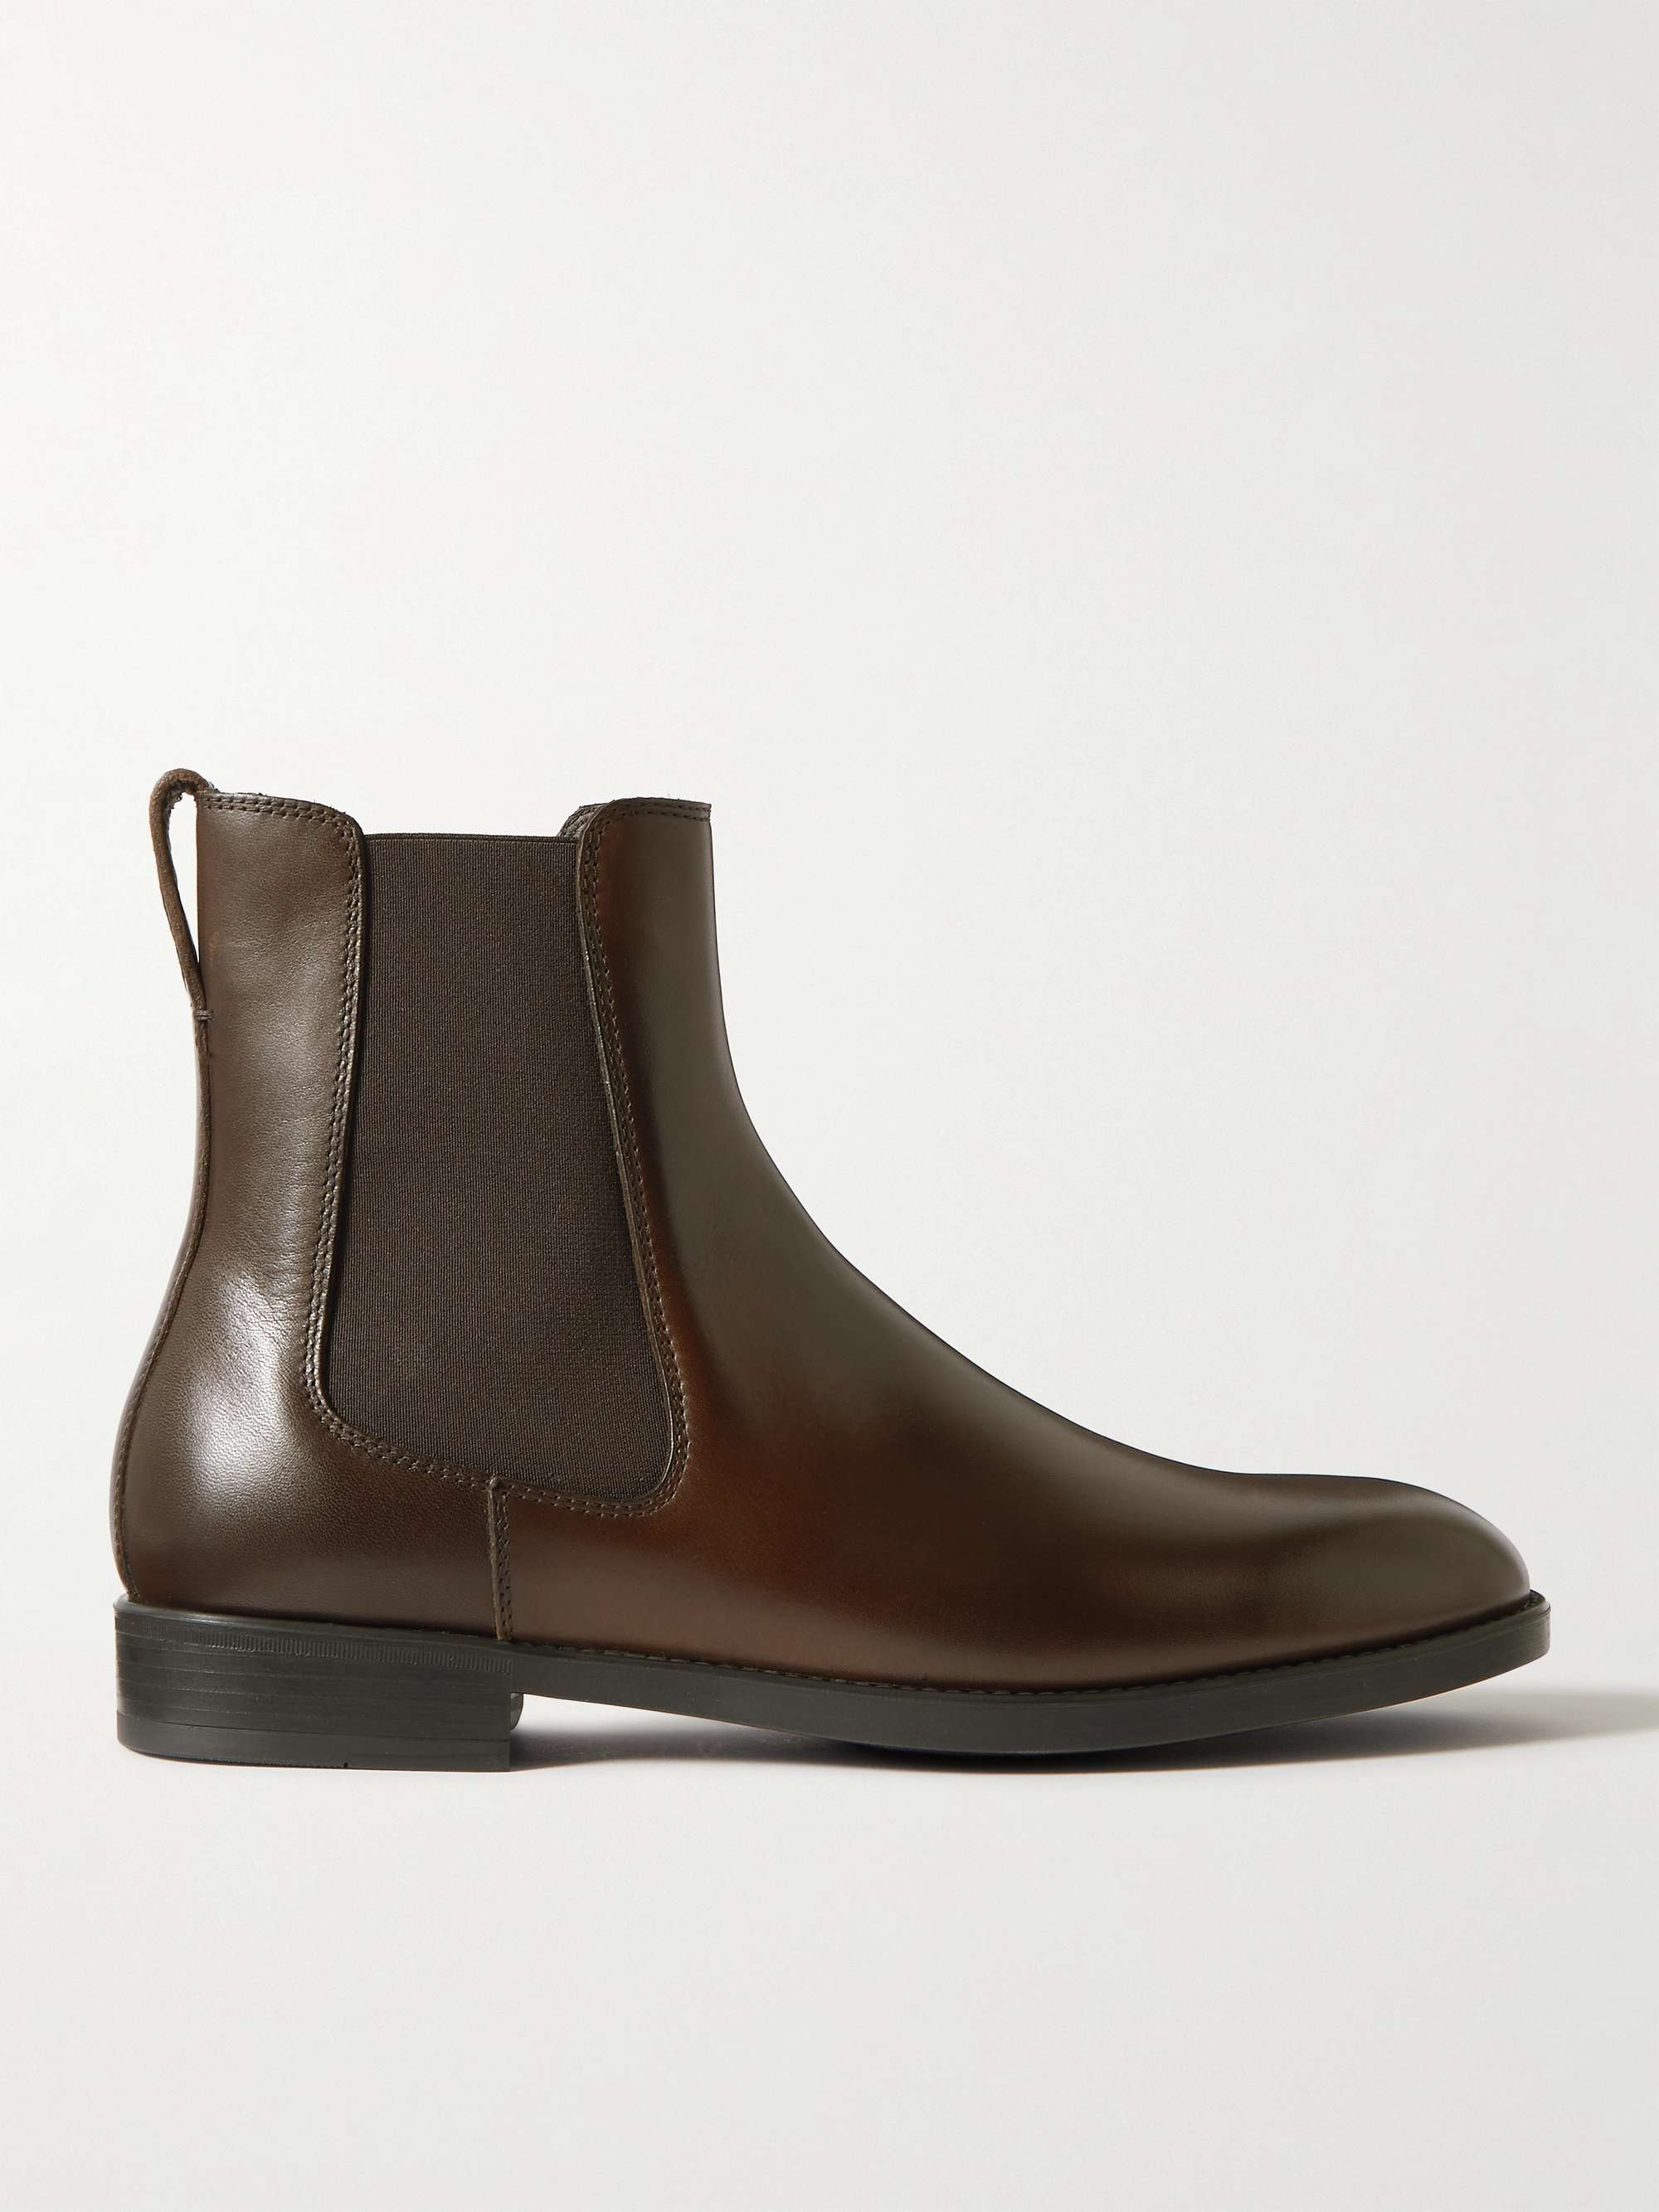 TOM FORD Robert Polished-Leather Chelsea Boots